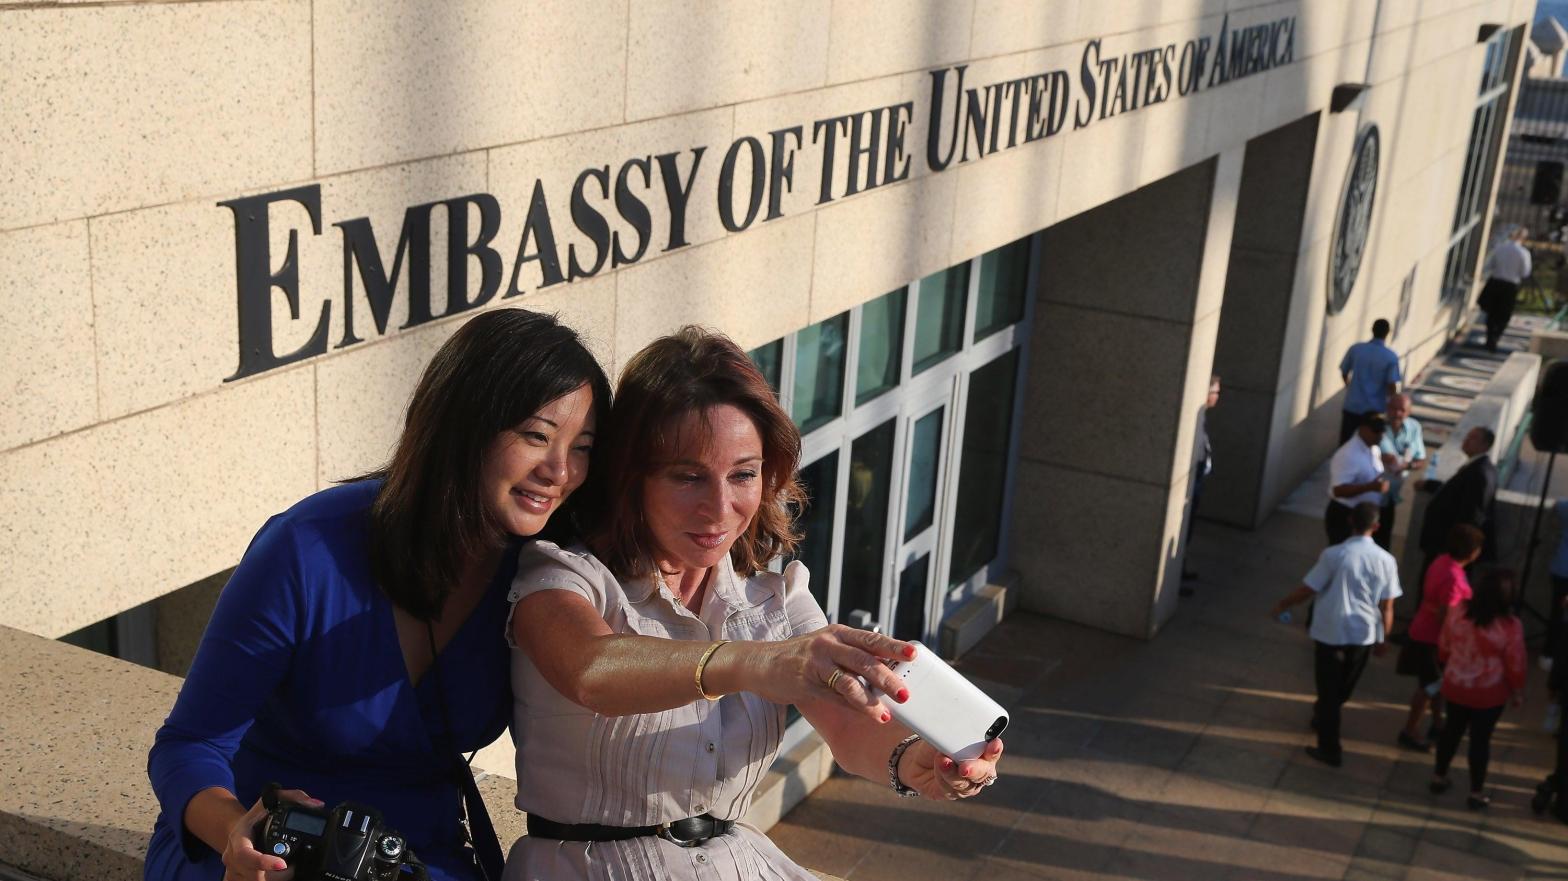 The U.S. reopened its embassy in Havana, Cuba in 2015. Then in 2016, officials working overseas at the embassy were the first to report strange symptoms that would eventually become known as 'Havana syndrome.'  (Photo: Chip Somodevilla, Getty Images)